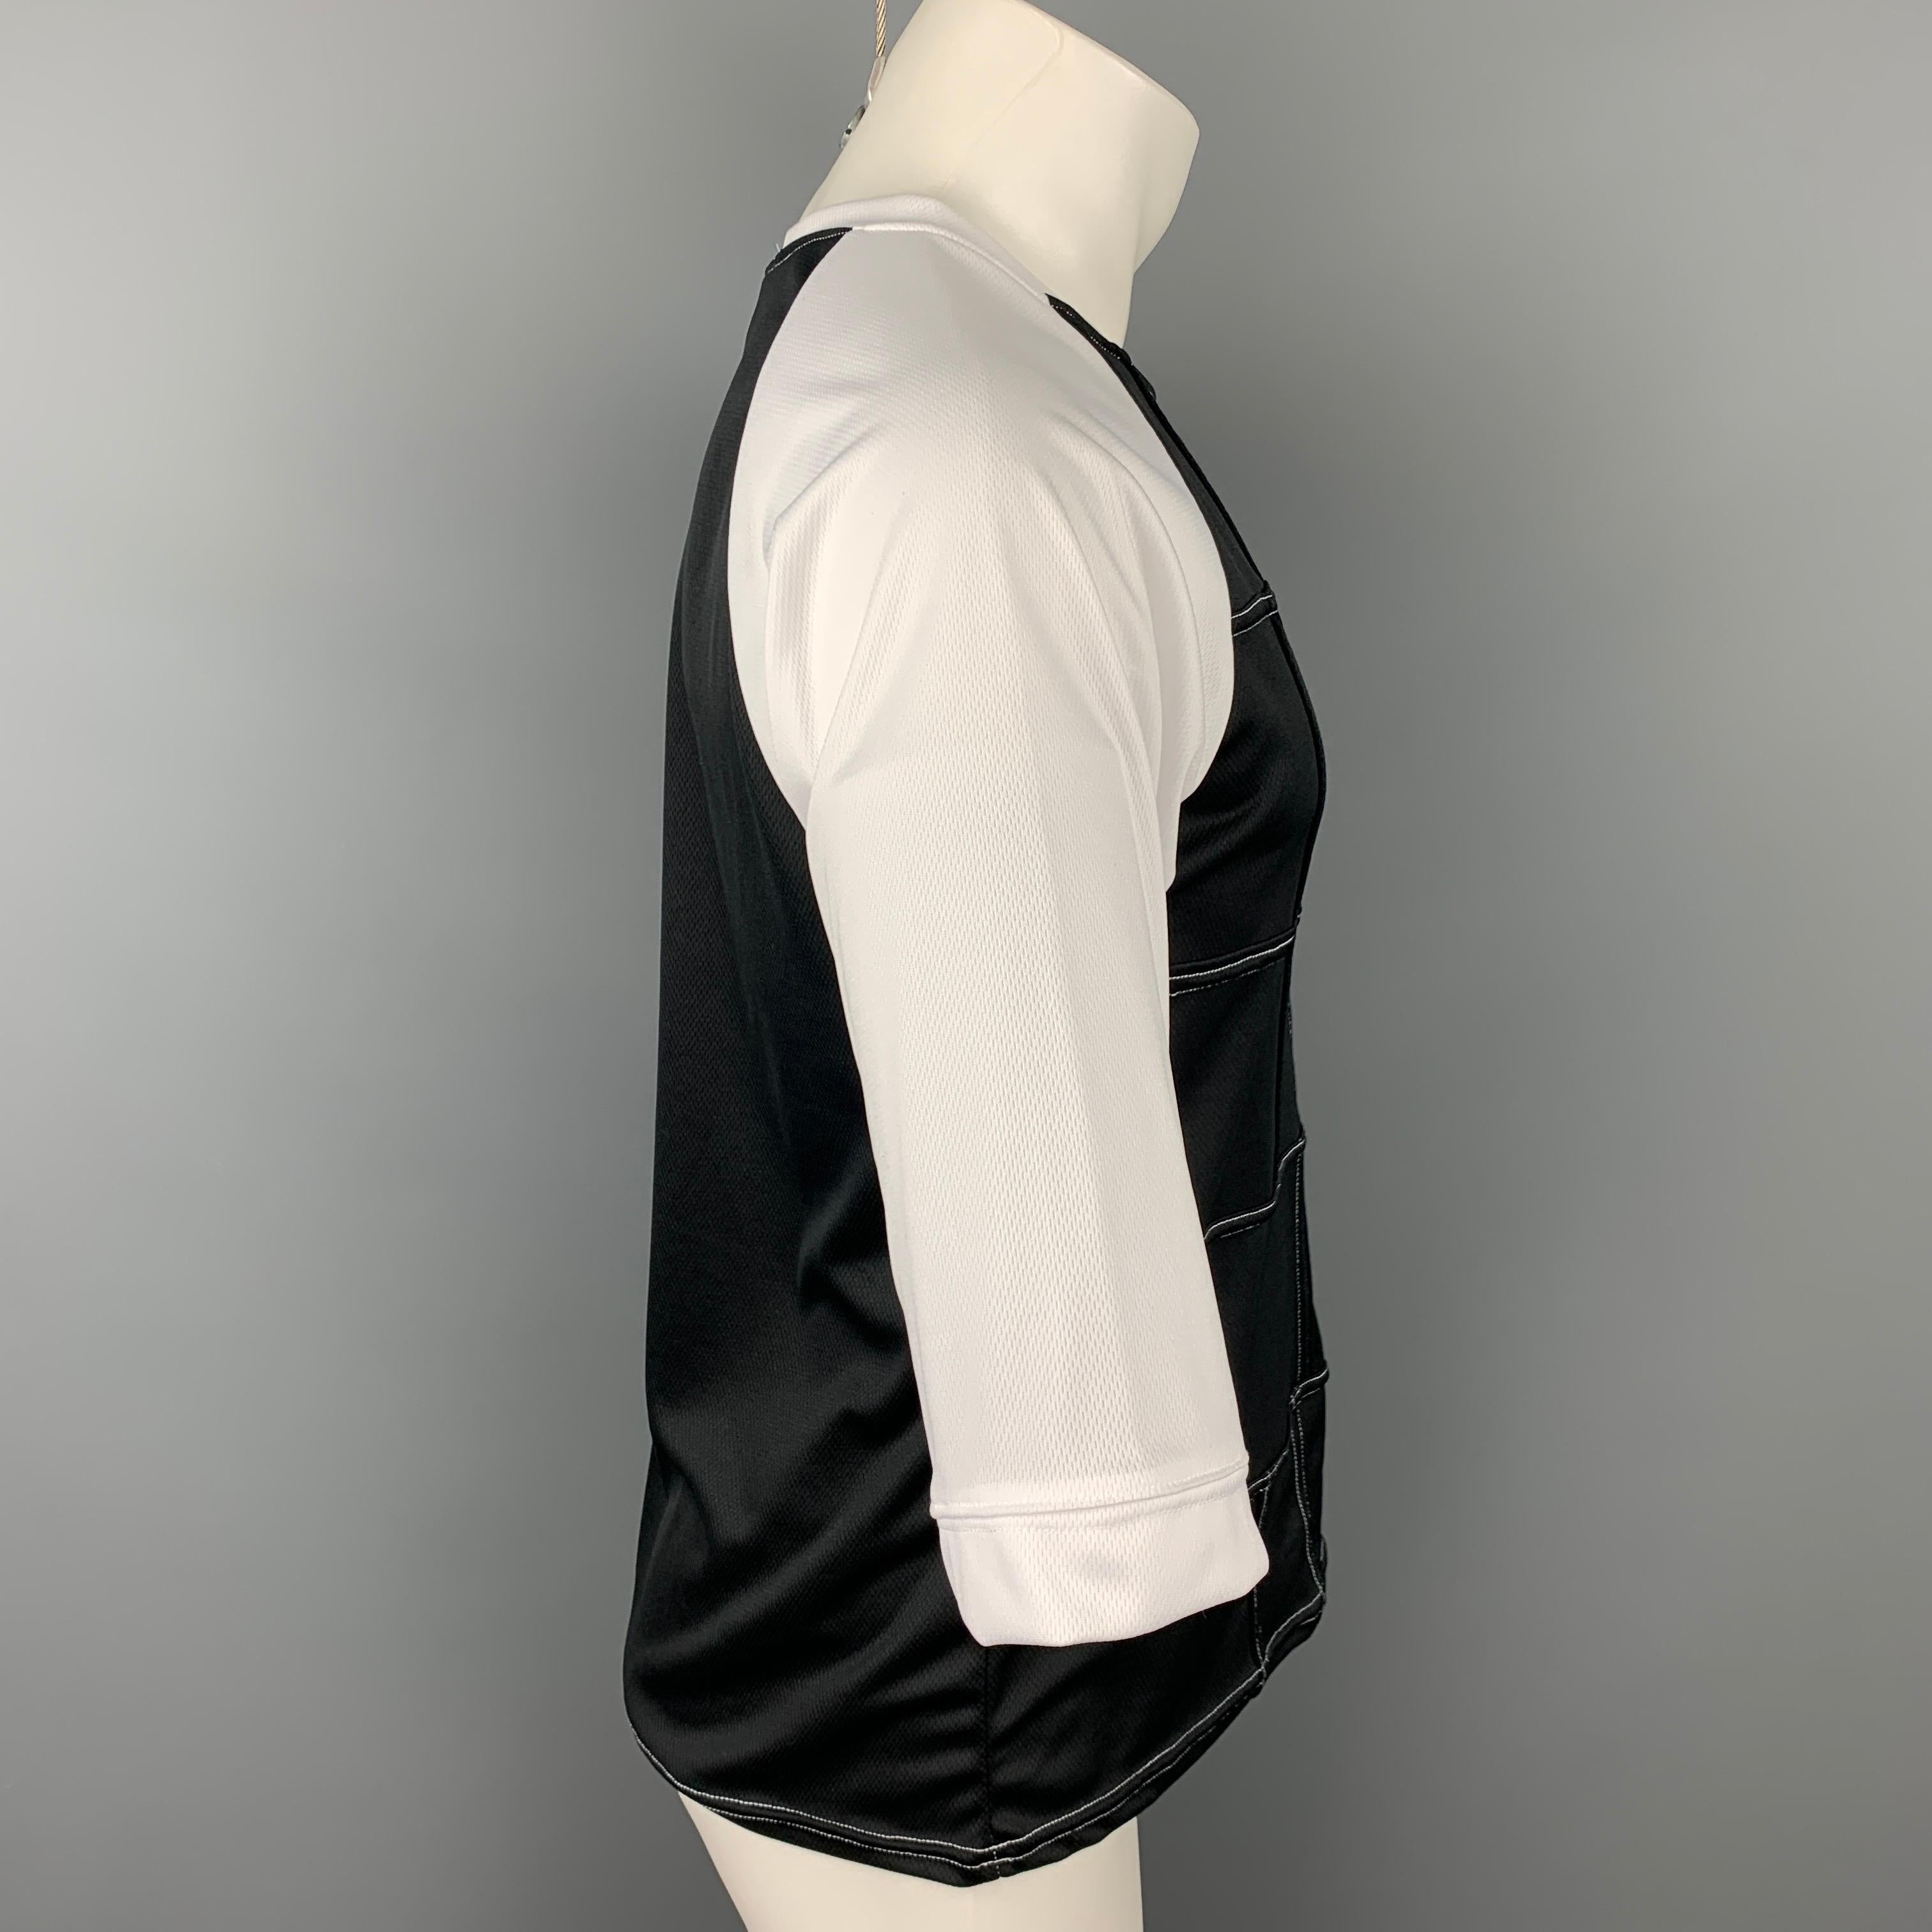 COMME des GARCONS BLACK t-shirt comes in a black & white two toned polyester featuring raglan sleeves and a crew-neck. Made in Japan.

Very Good Pre-Owned Condition.
Marked: XL

Measurements:

Shoulder: 16.5 in.
Chest: 40 in.
Sleeve: 16 in.
Length: